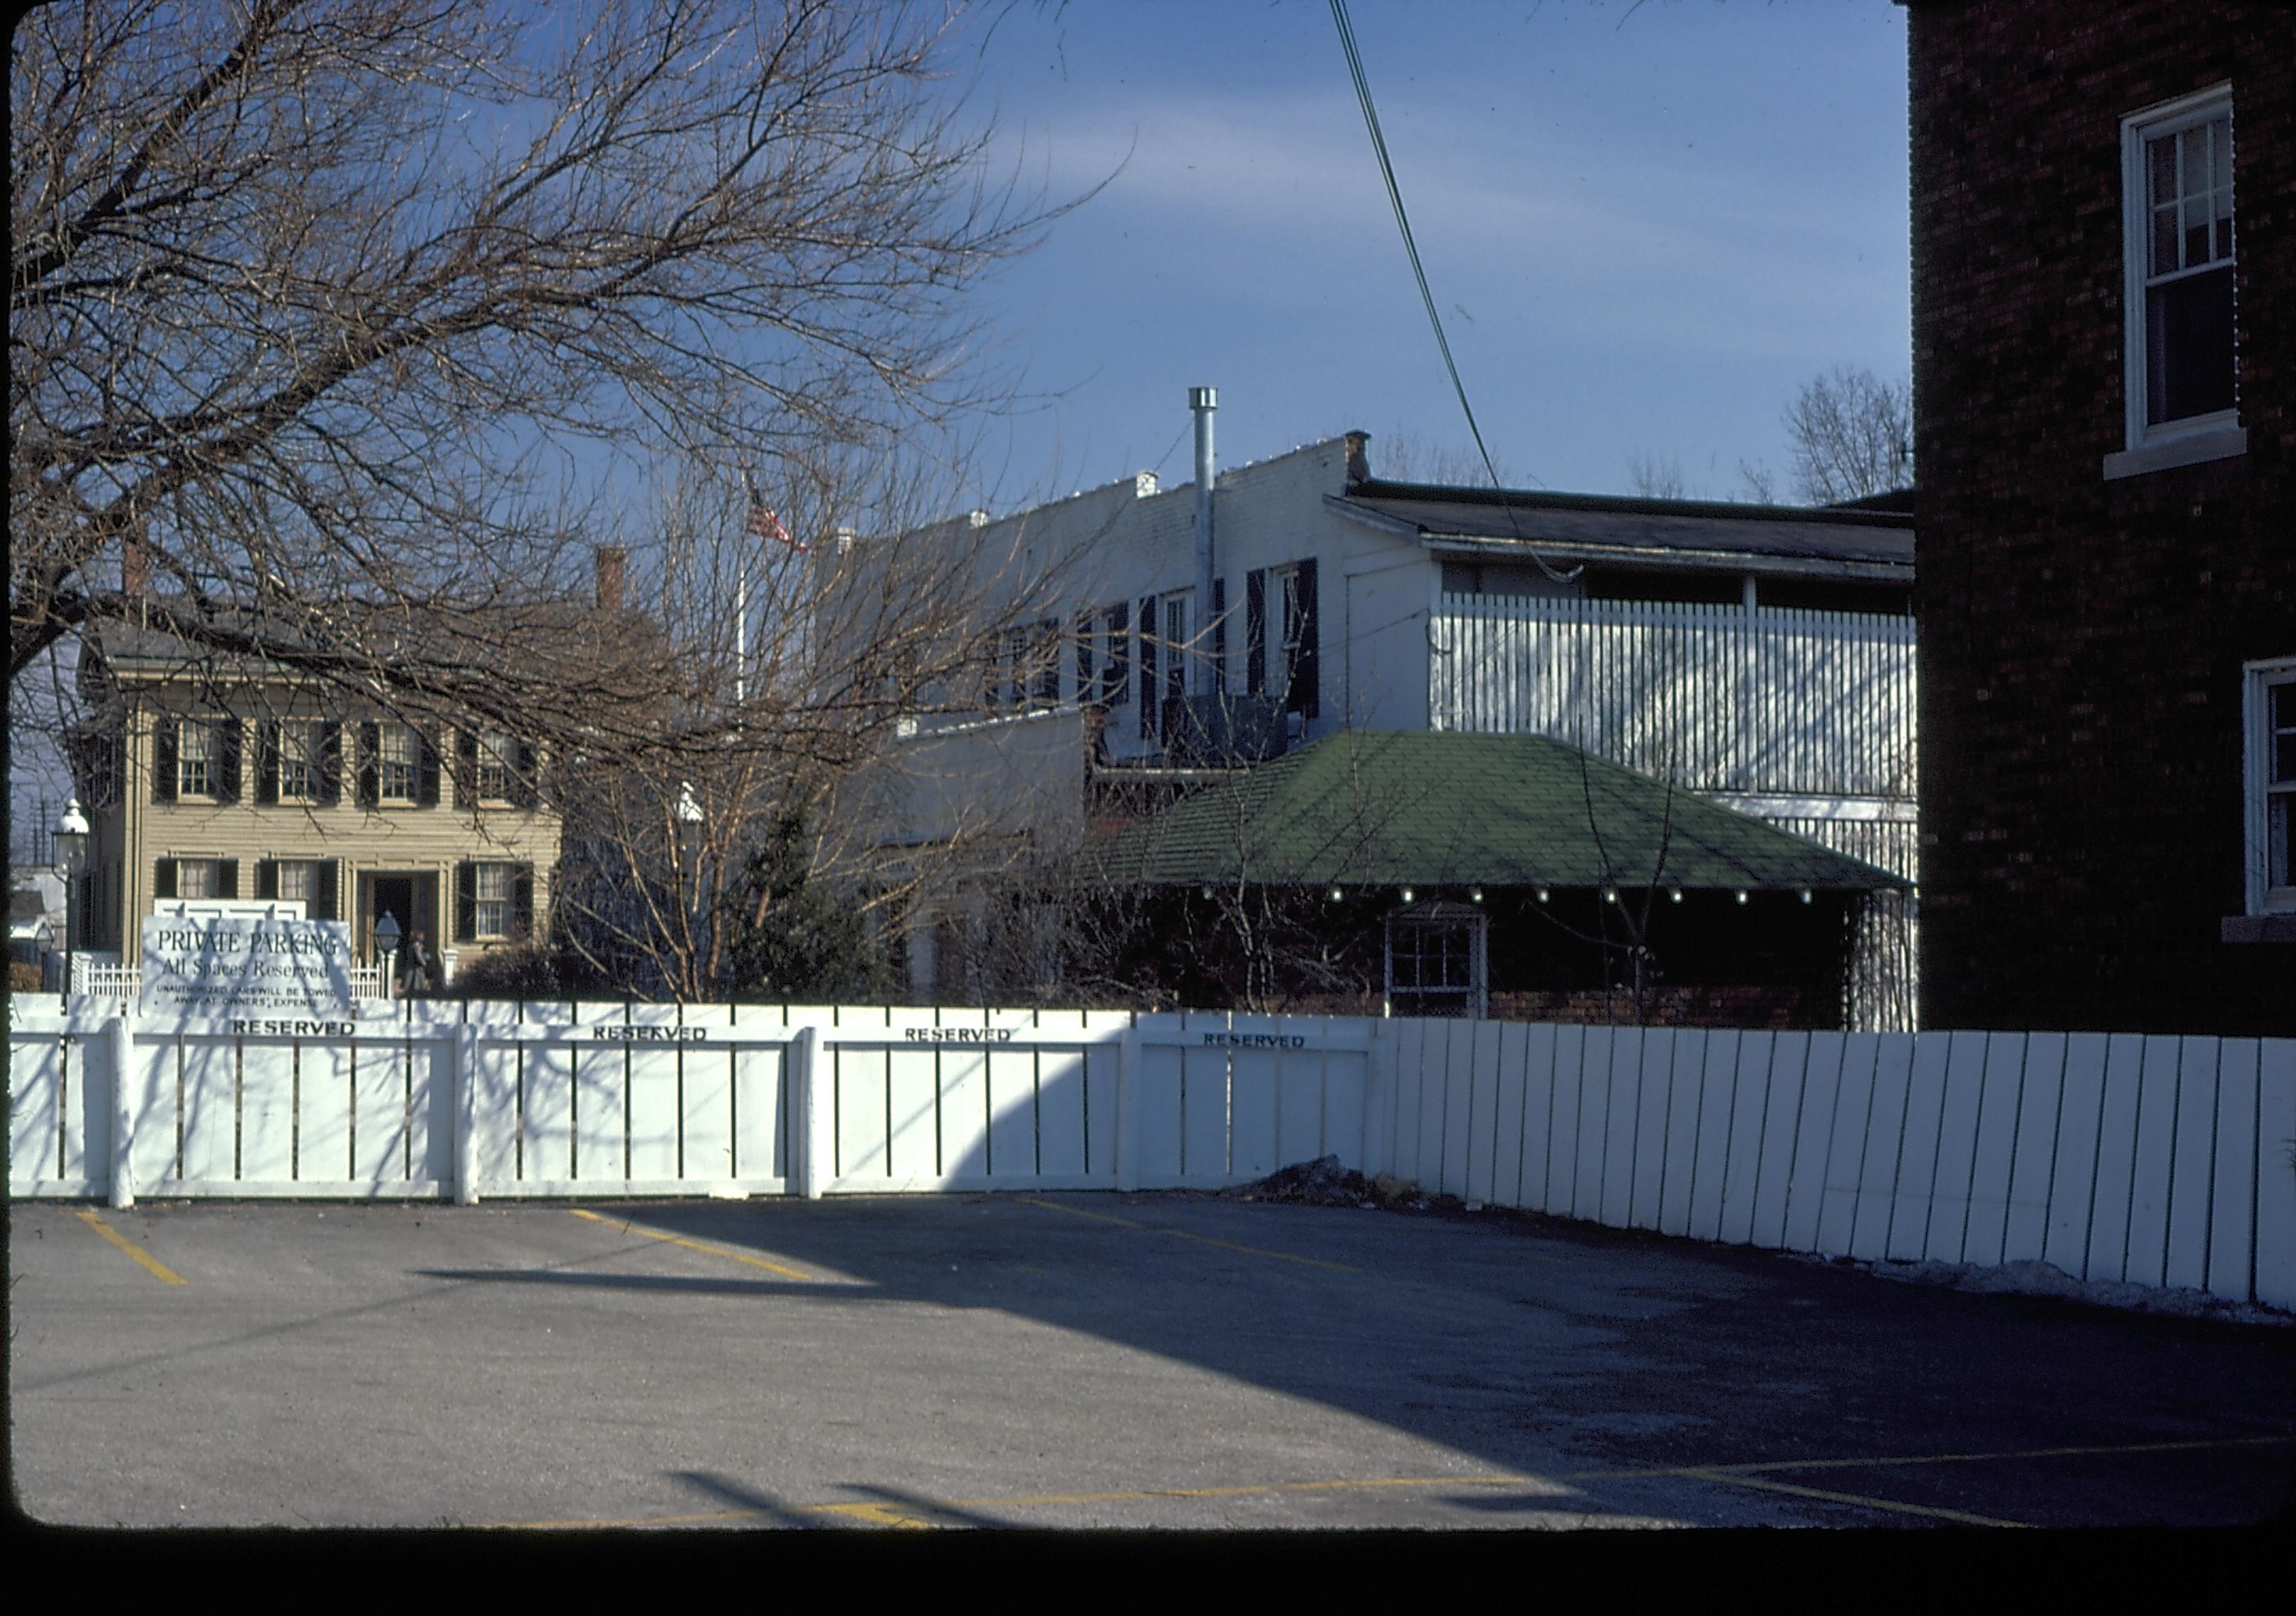 NA Lincoln Home NHS- Various locations, class 2 slide 130, 19 neighborhood, parking